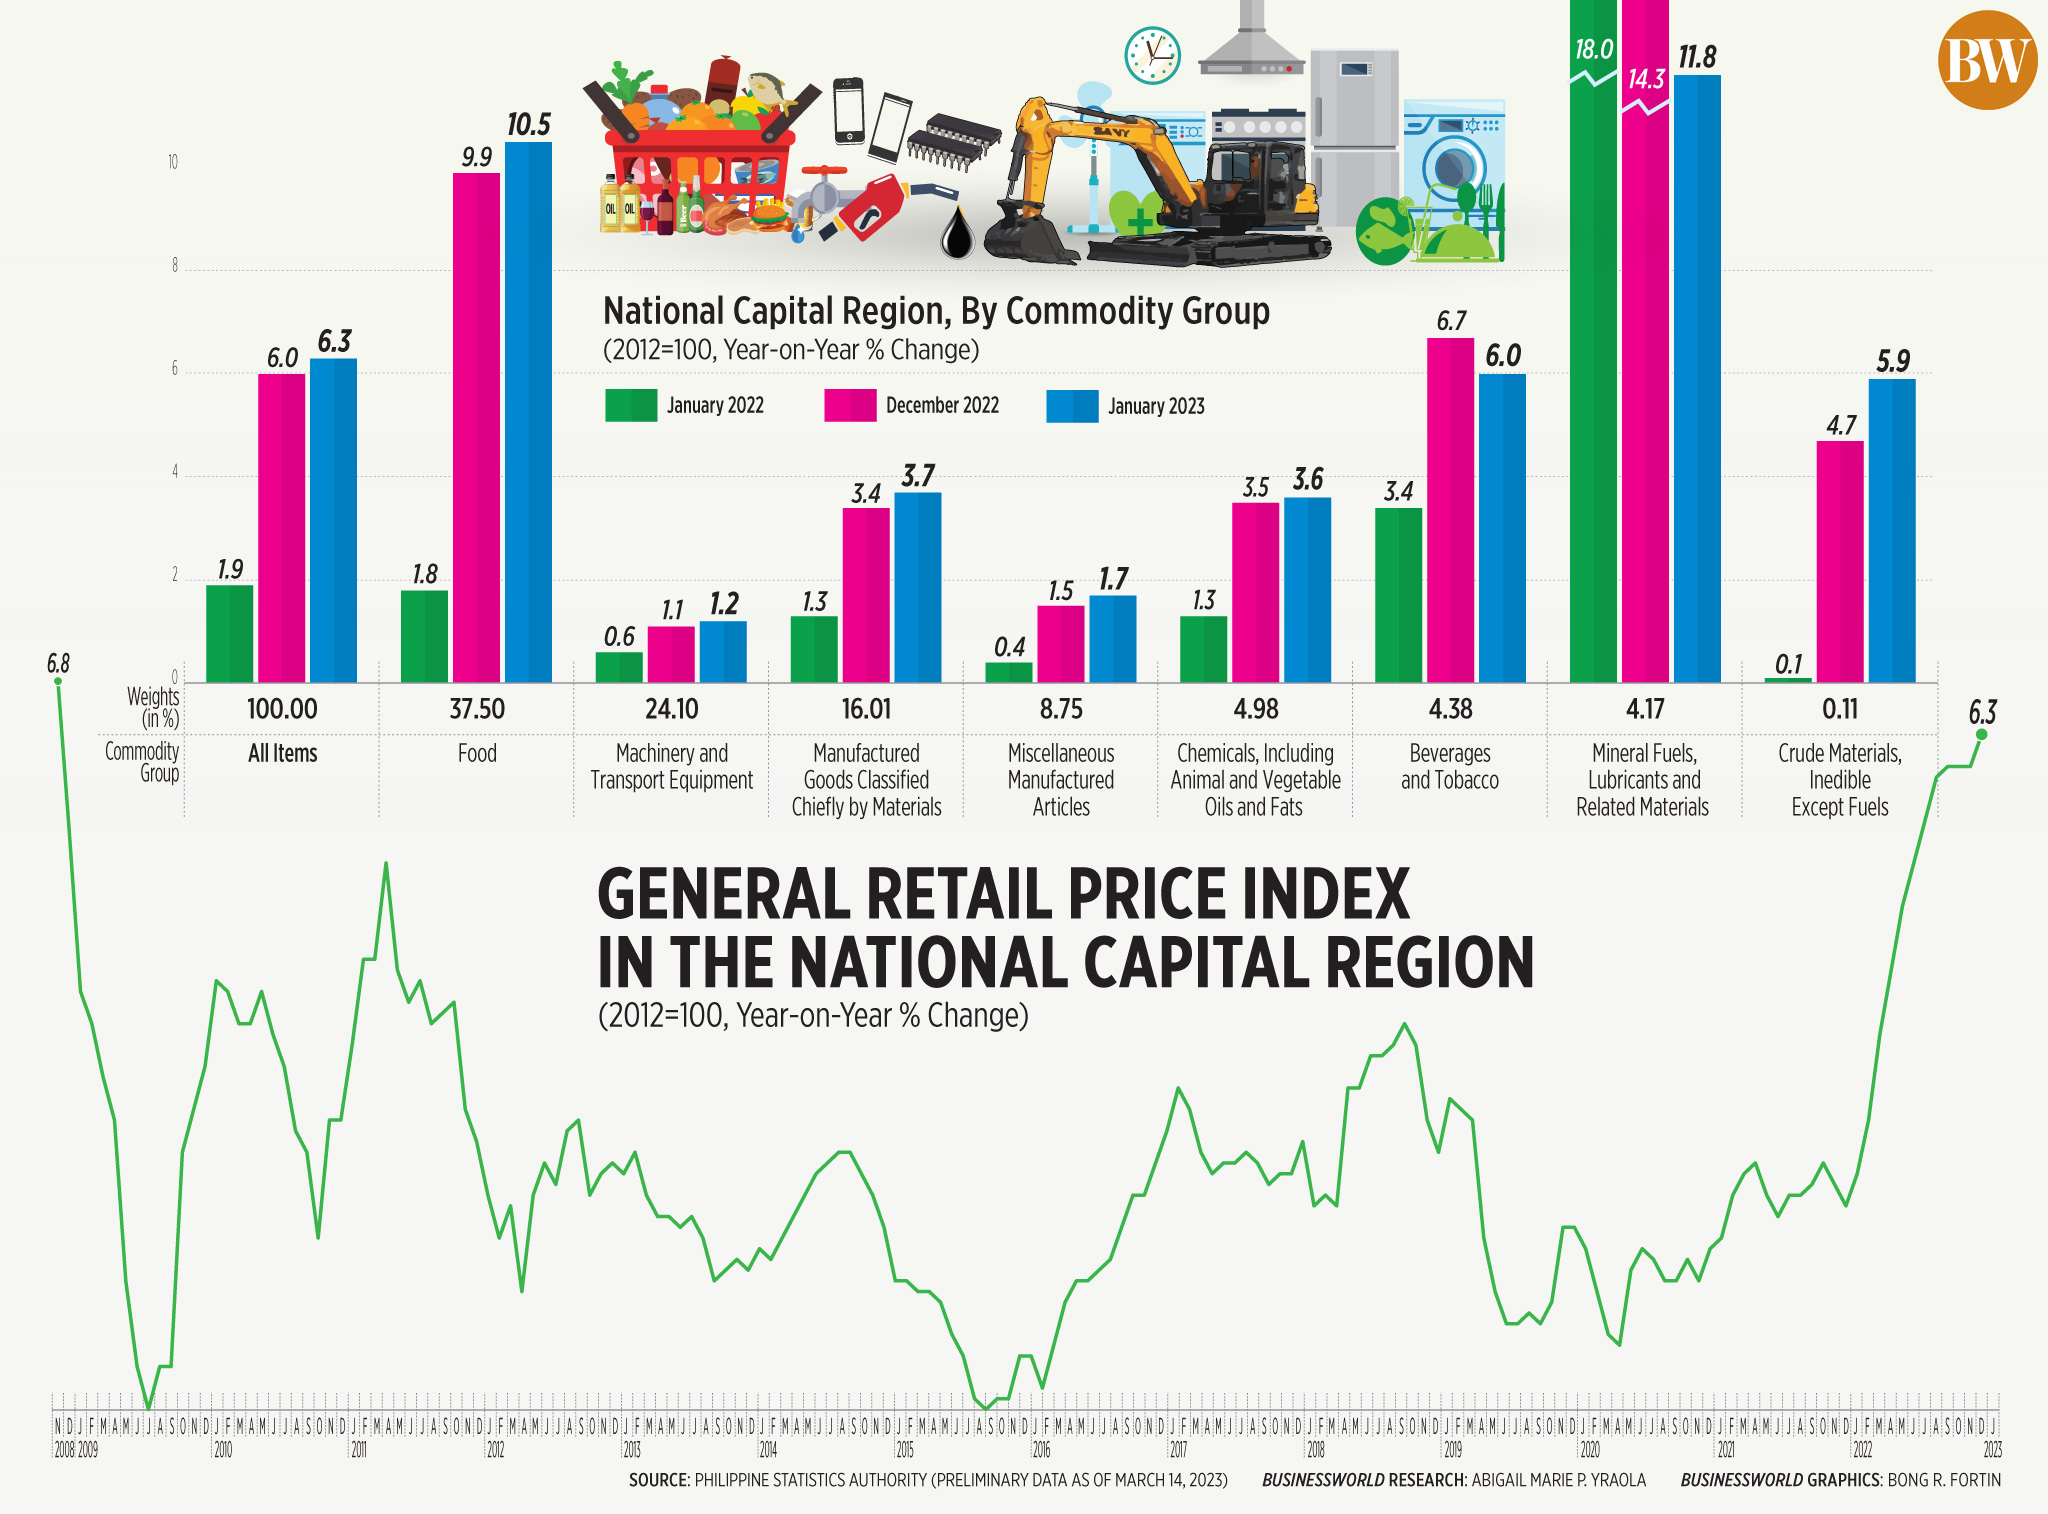 General Retail Price Index in the National Capital Region